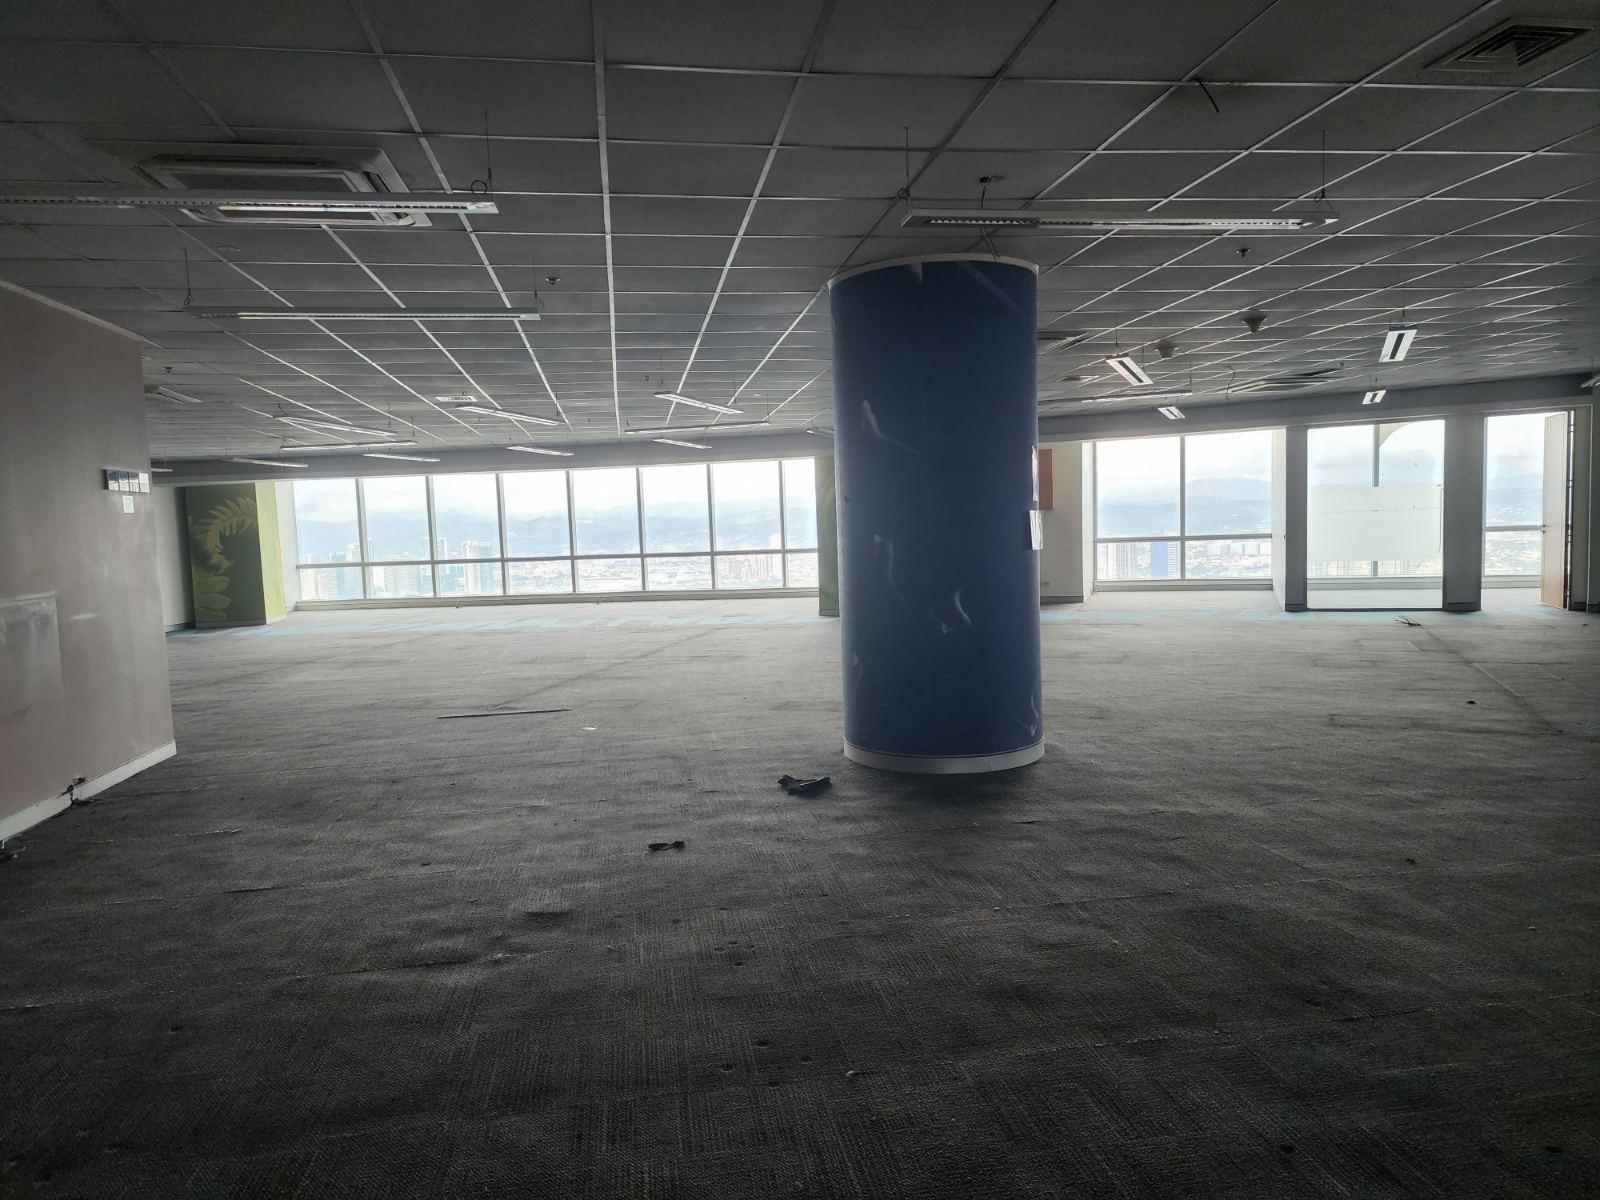 Office Space Lease Rent Whole Floor Pasig Ortigas 2020 sqm